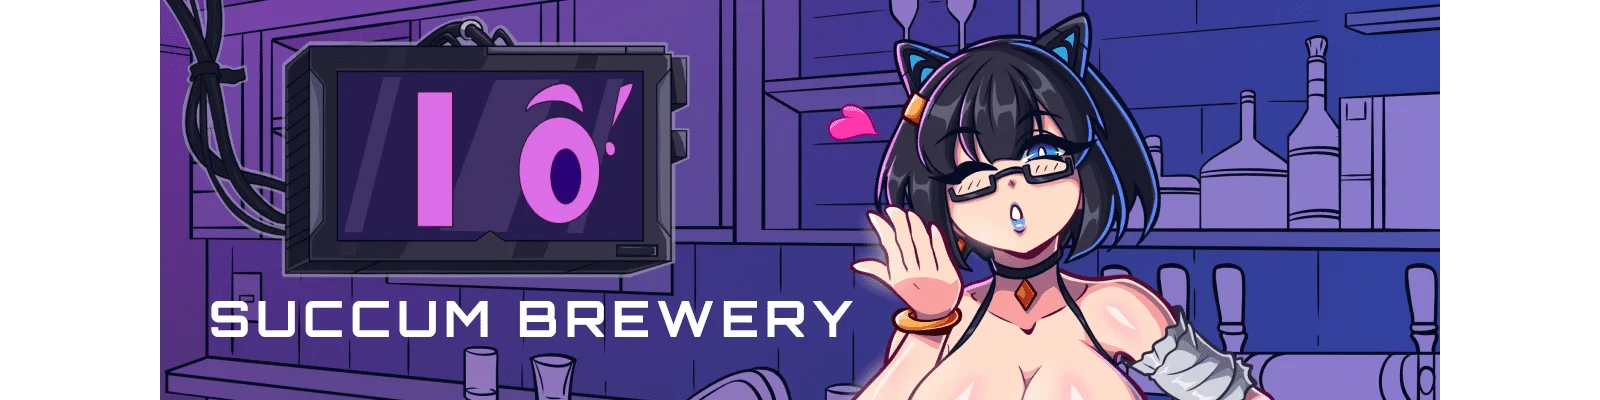 Download LimeJuiceGames - Succum Brewery - Version 0.2.3b